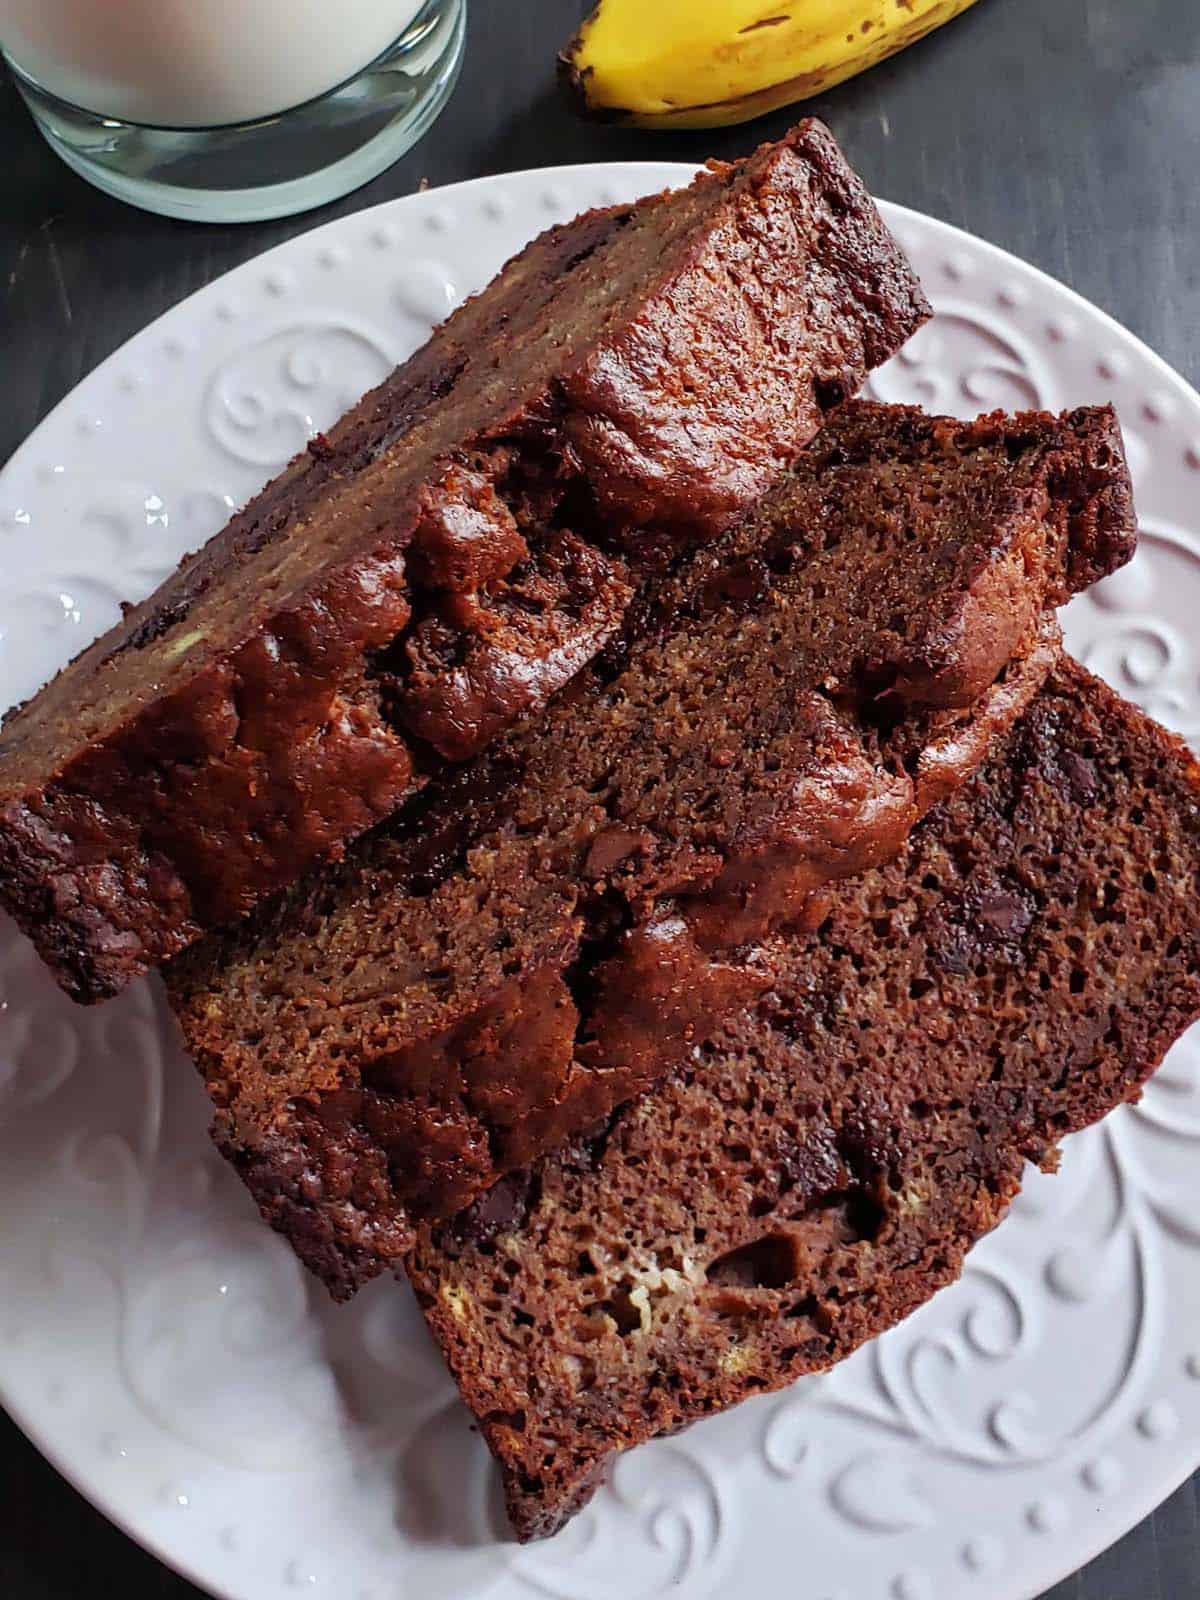 Three slices of chocolate banana bread on a white plate.